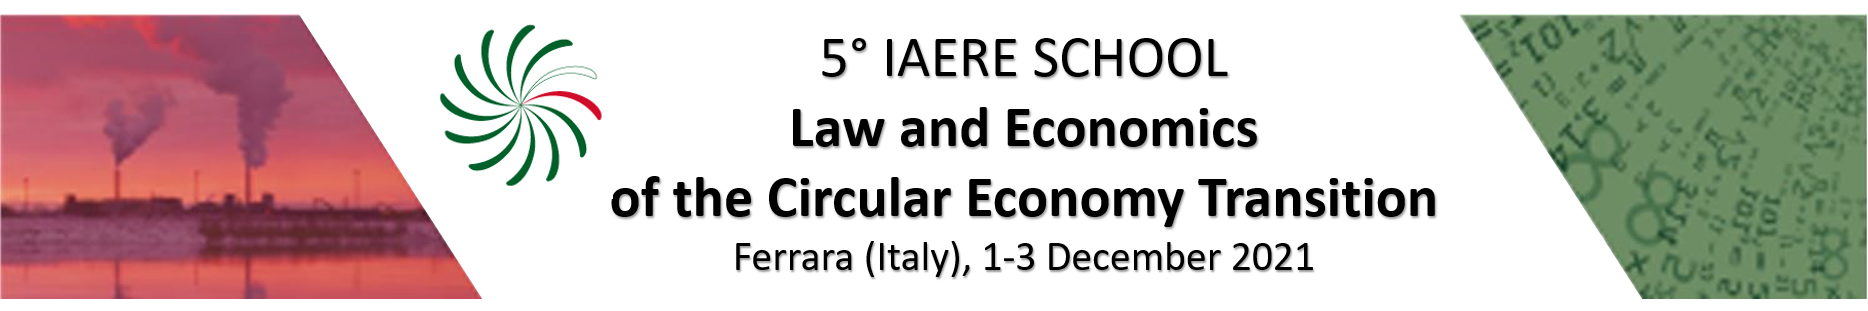 5th IAERE School on Law and Economics of the Circular Economy Transition